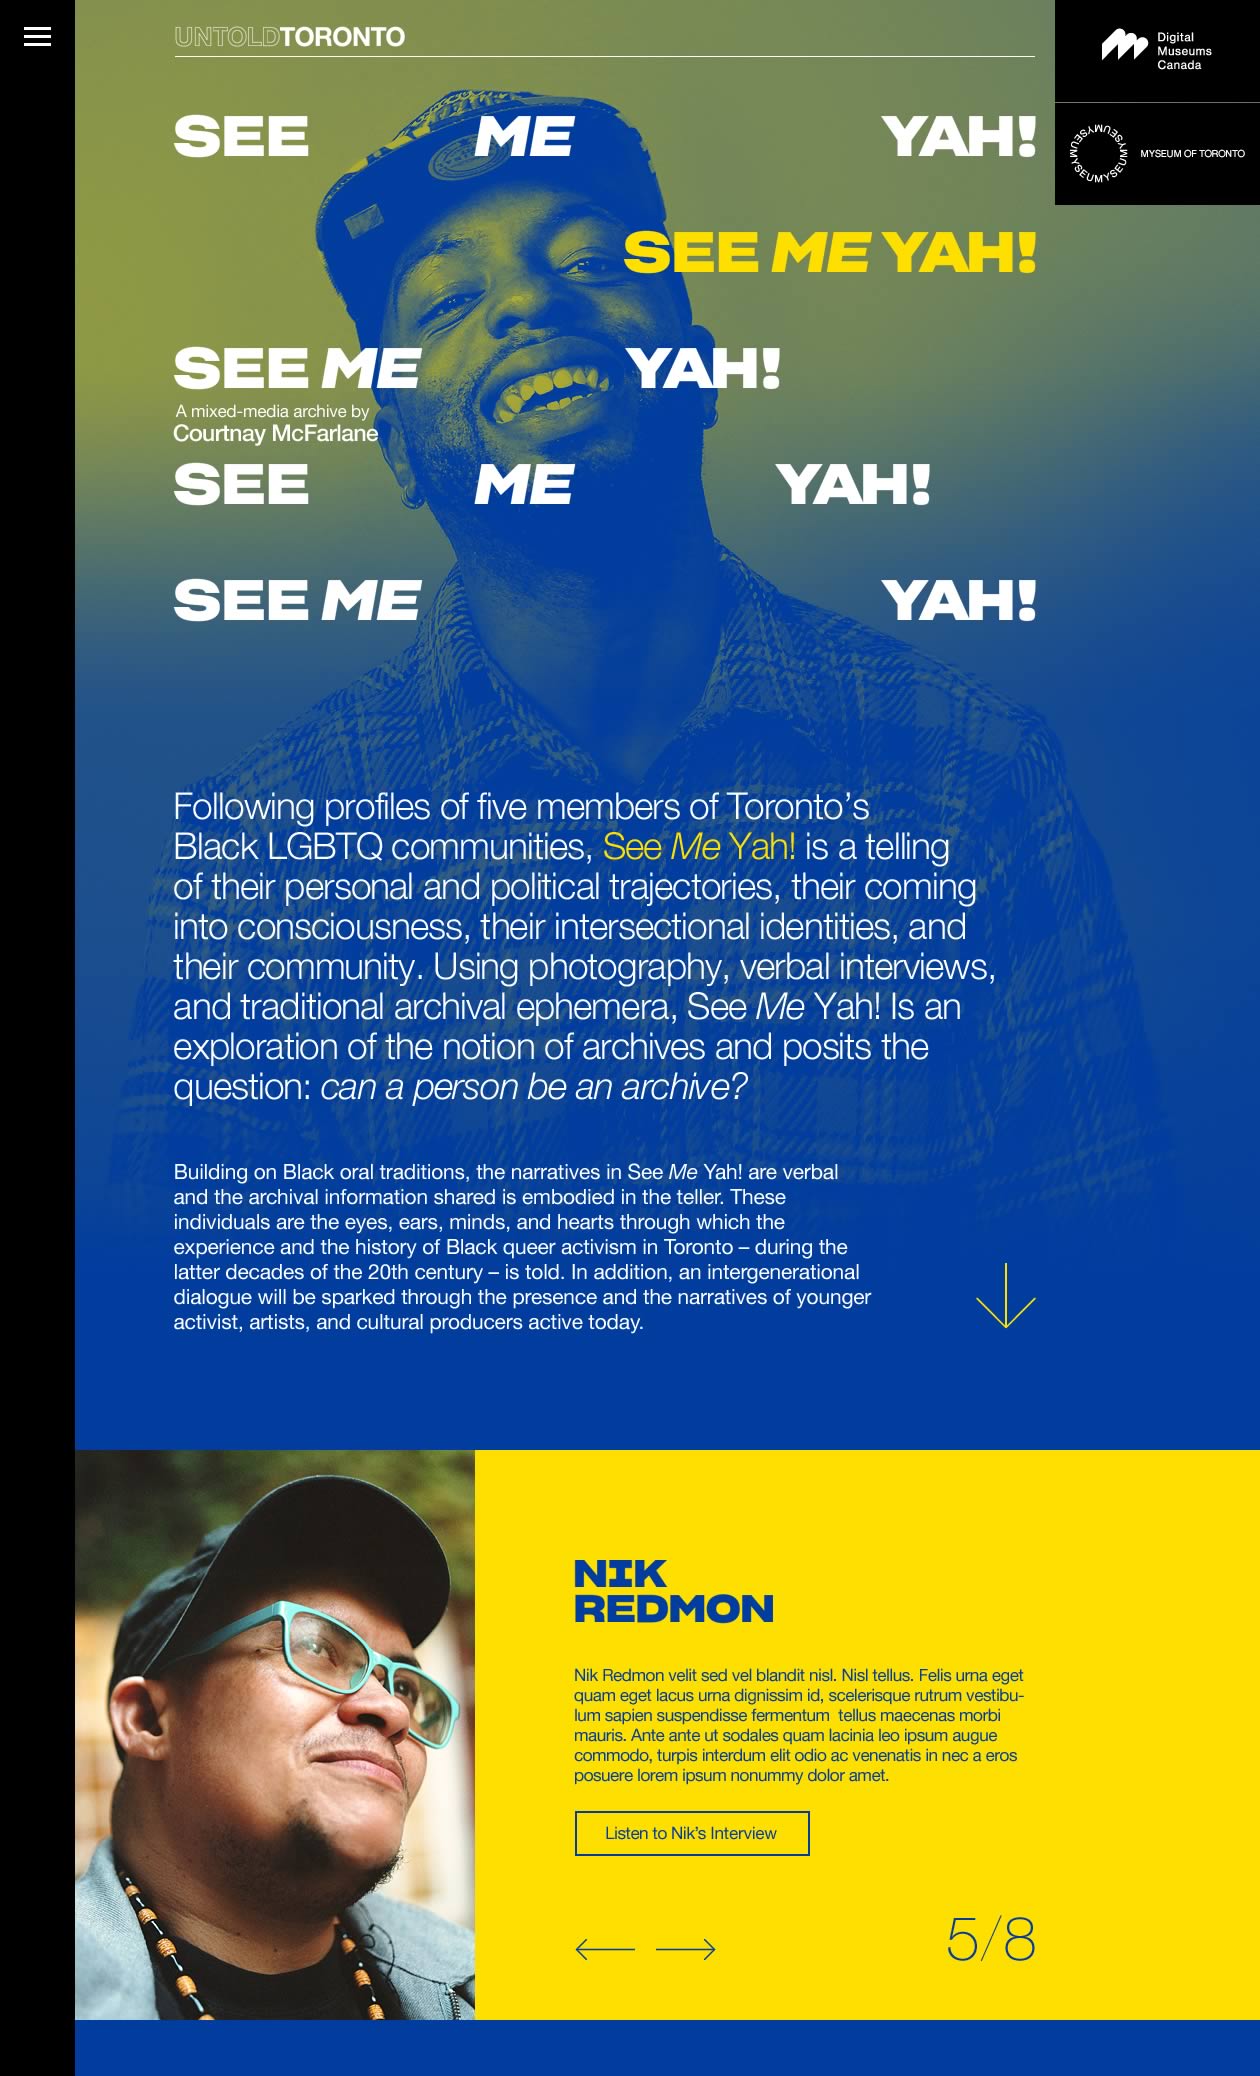 Capture of the full 'See Me Yah!' landing page from the Untold Toronto microsite